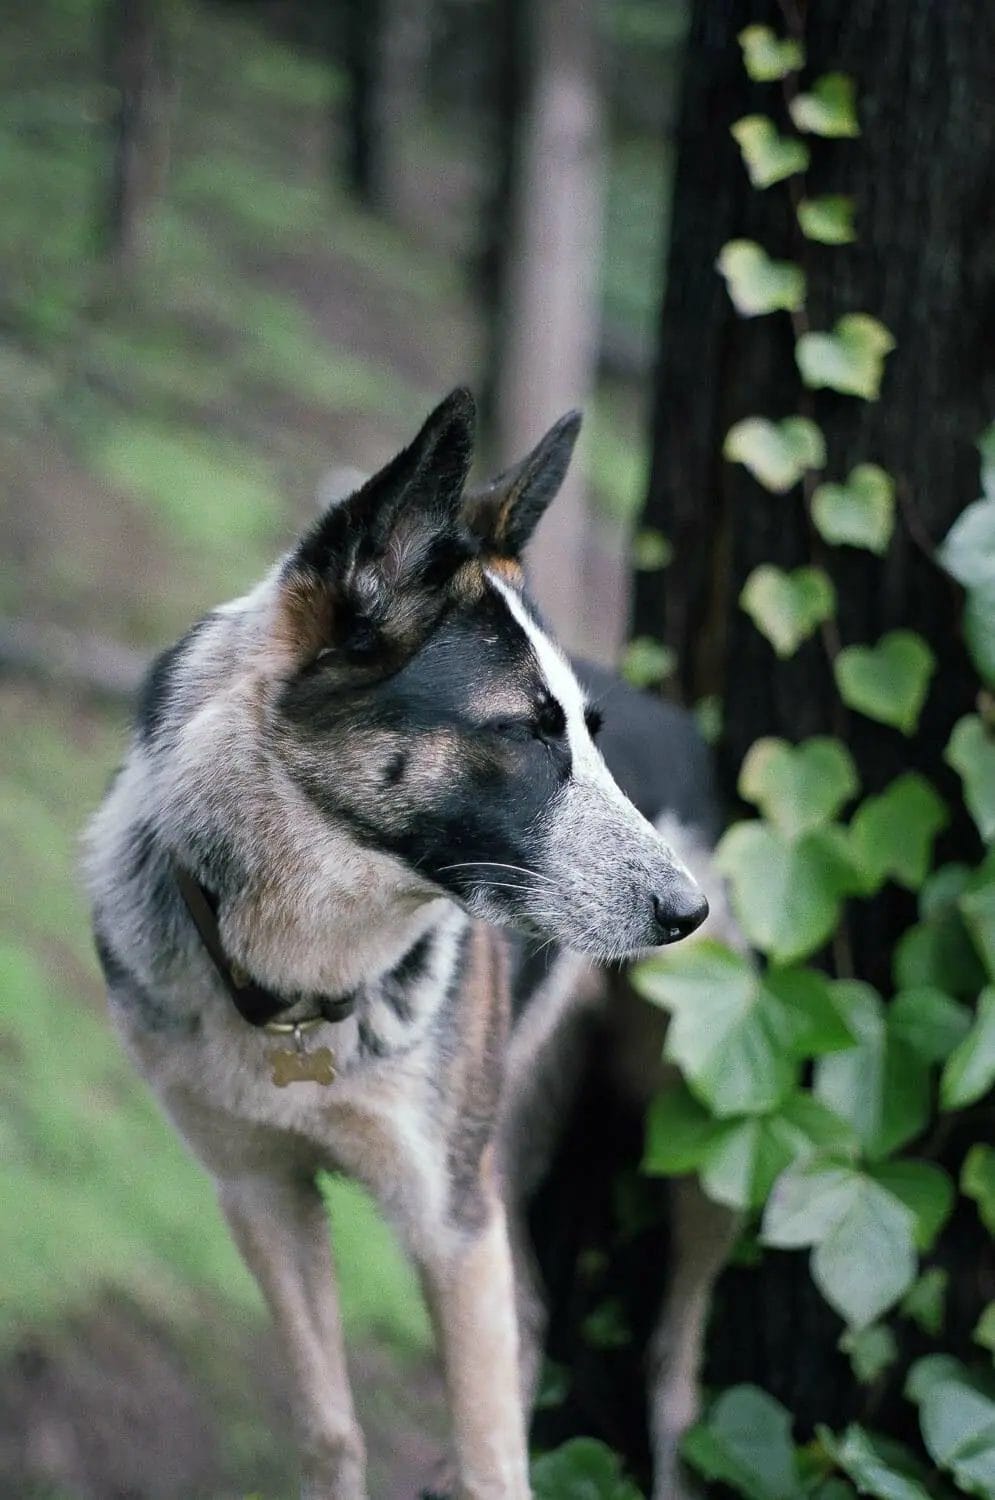 A german shepherd dog standing in a forest, gazing intently into the distance.